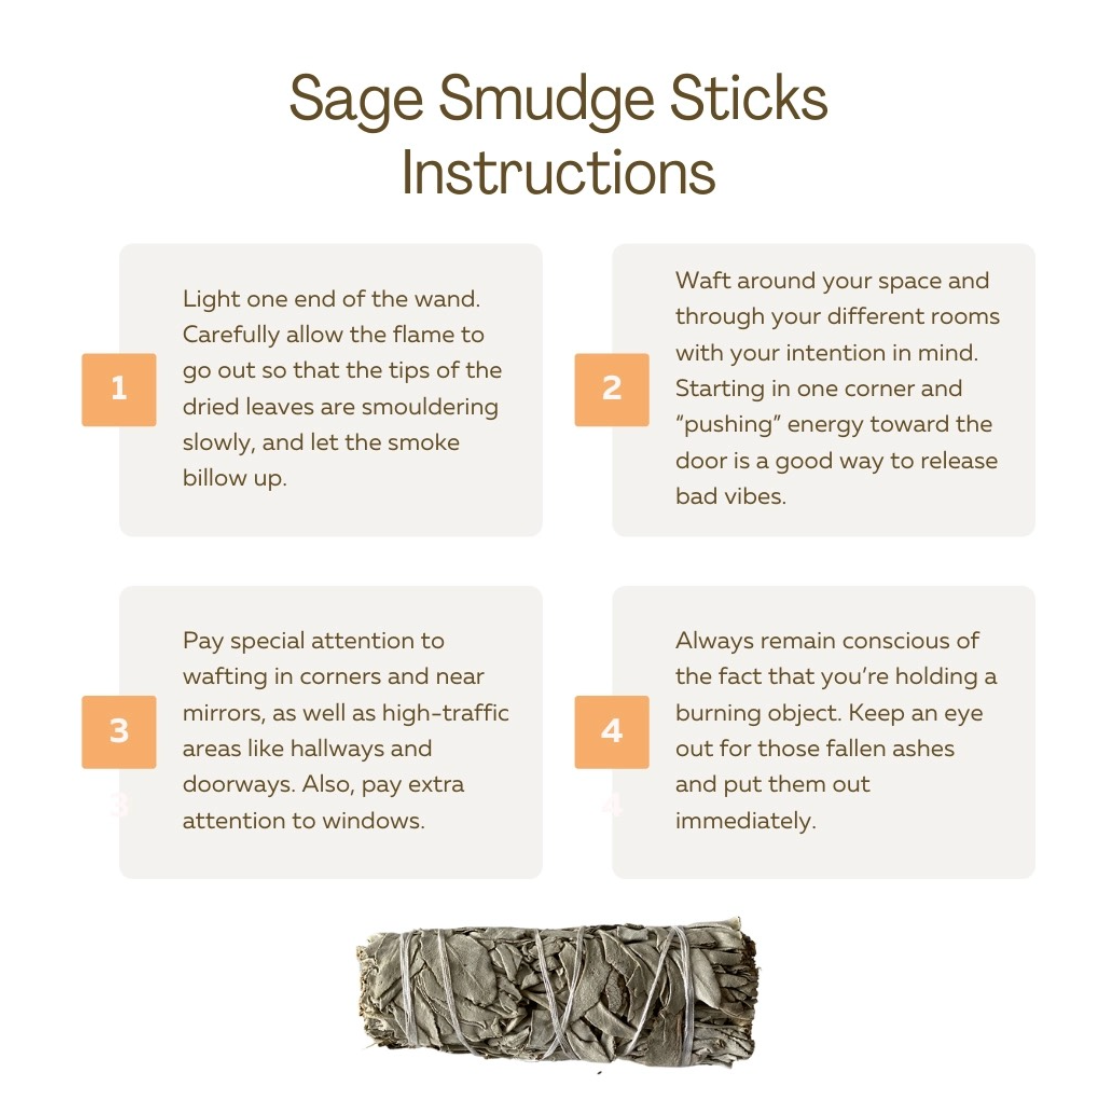 Instructions for how to use a sage smudge stick